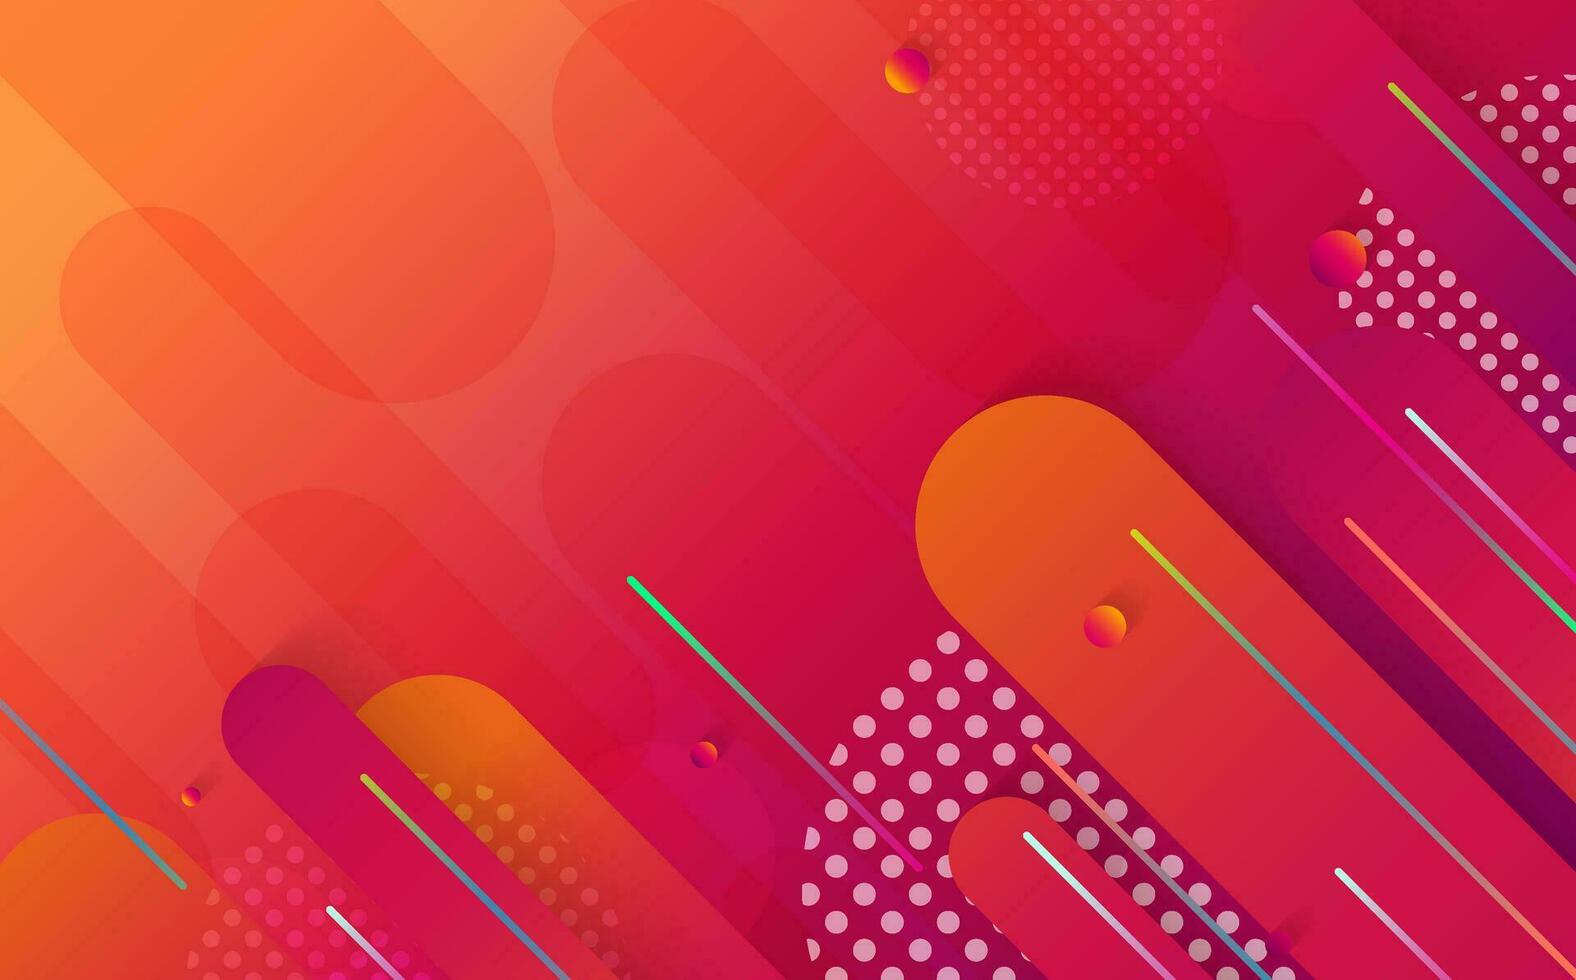 Abstract gradient template design of futuristic artwork decorative. Overlapping style for webpage background. Vector